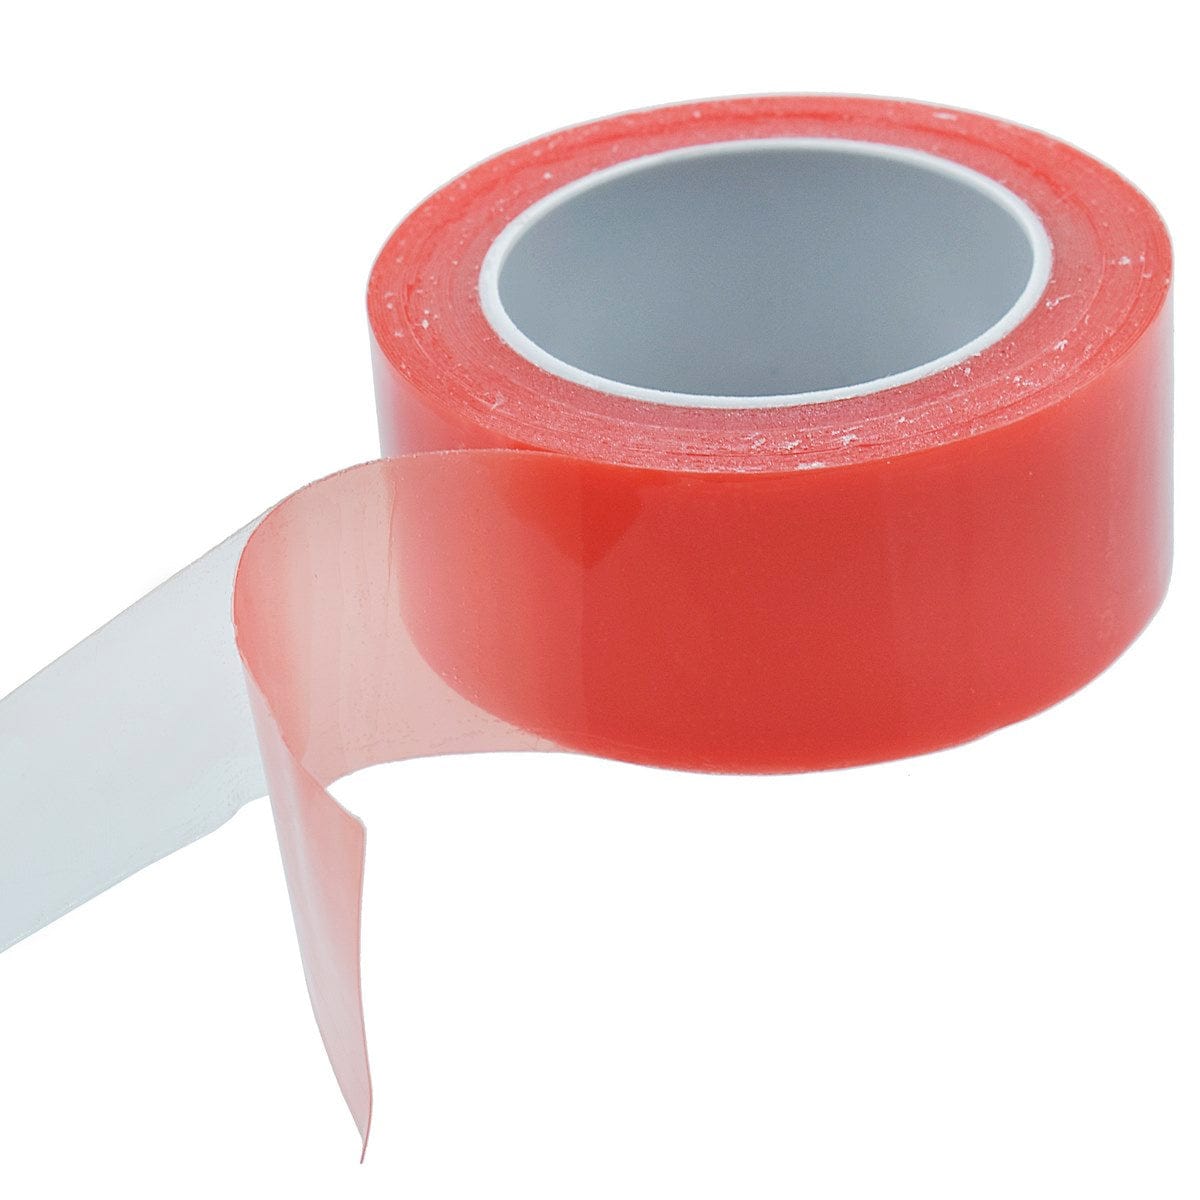 jags-mumbai Two way tape Tape Double Sided Red 5Mtr 24mm